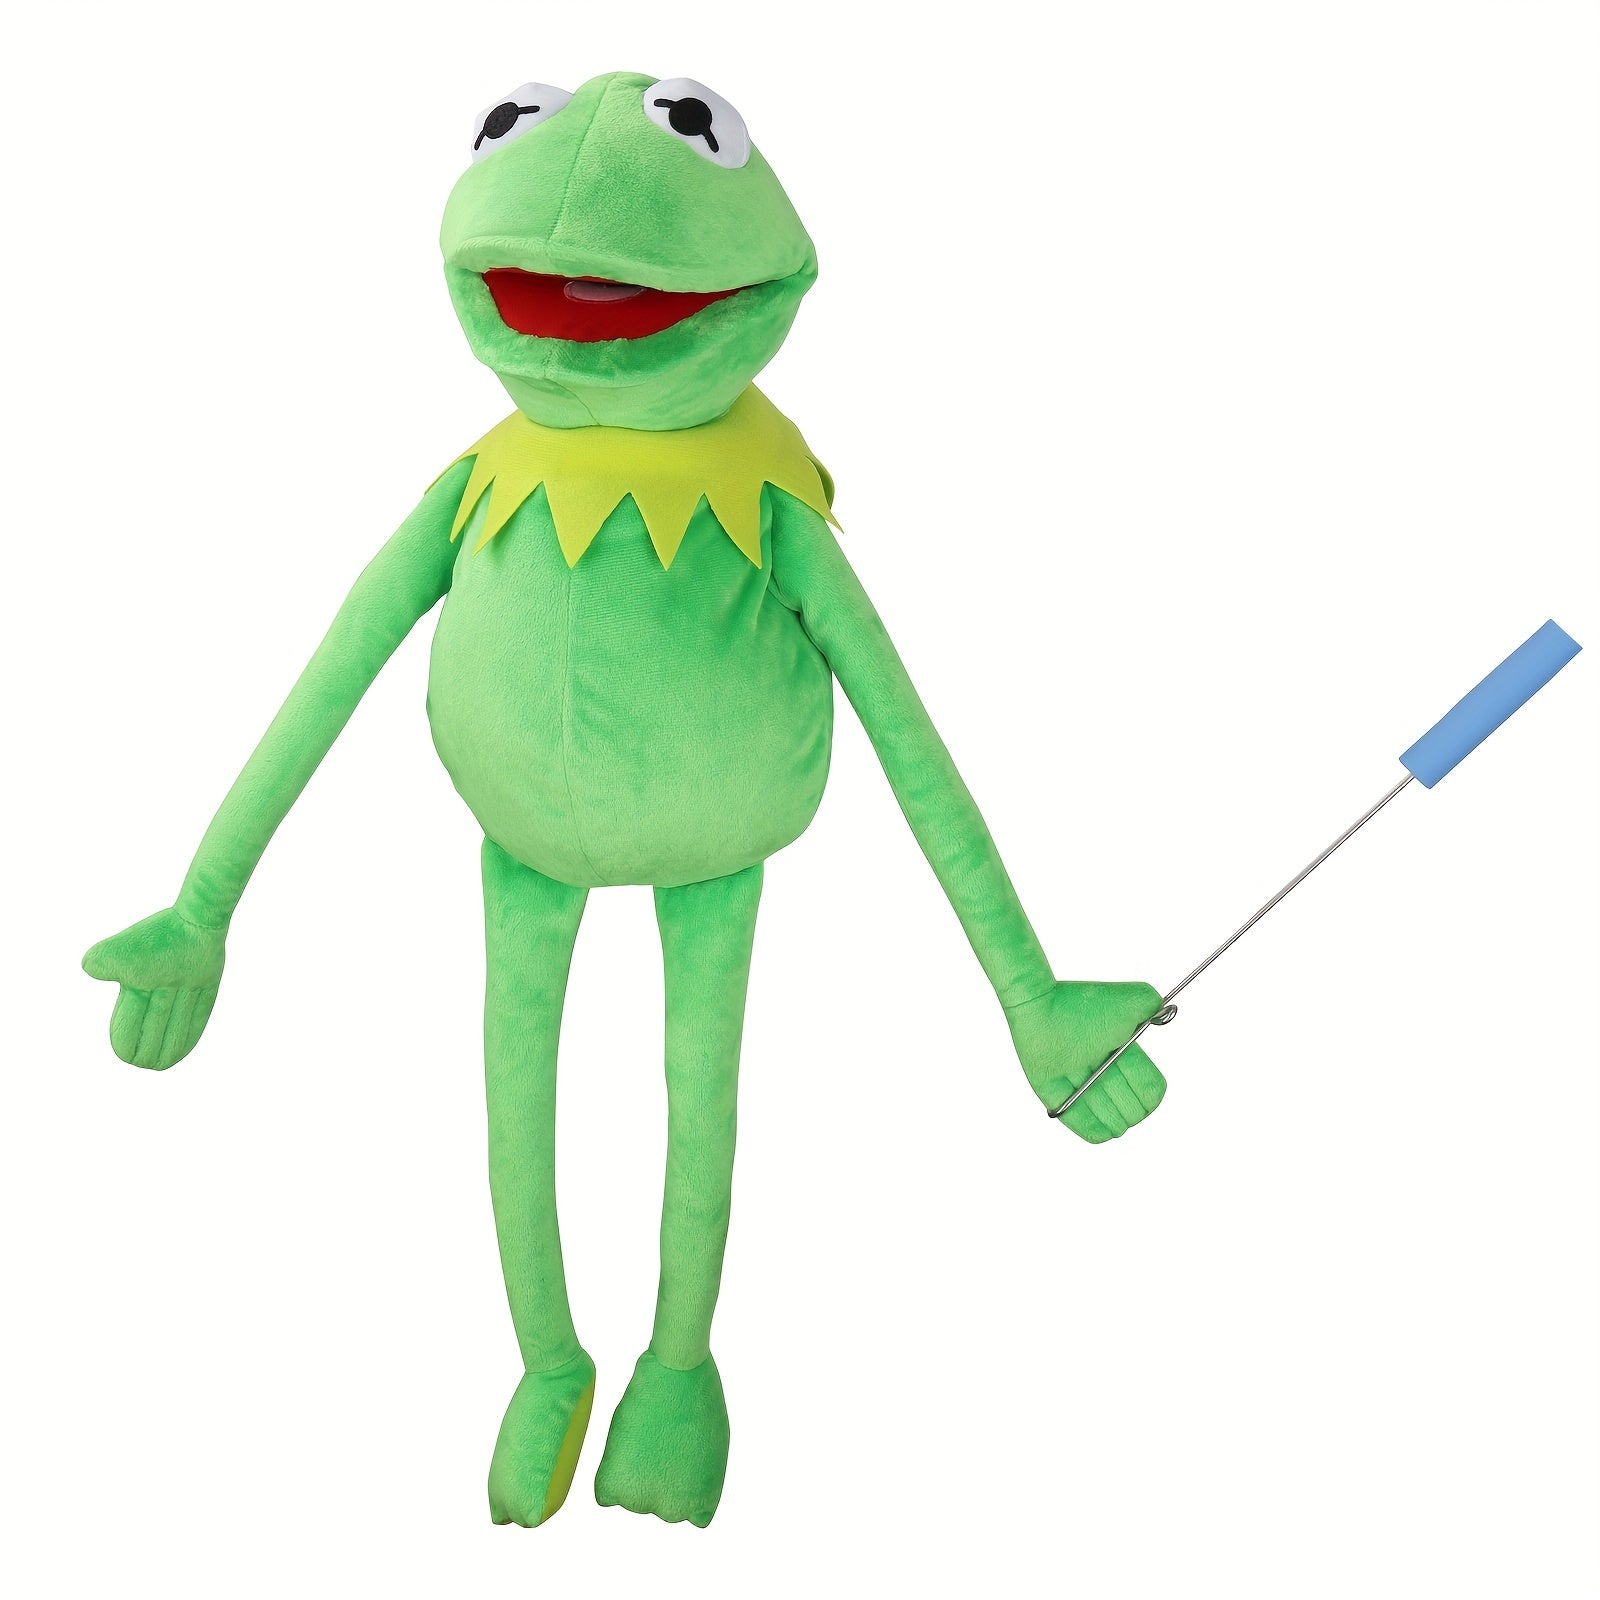 Kermit Frog Puppet With Control Rod Metal Puppet Set,The Muppets Show, Soft Plush Frog Puppet Doll Suitable For Role Play -Green, 24 Inches - Cykapu